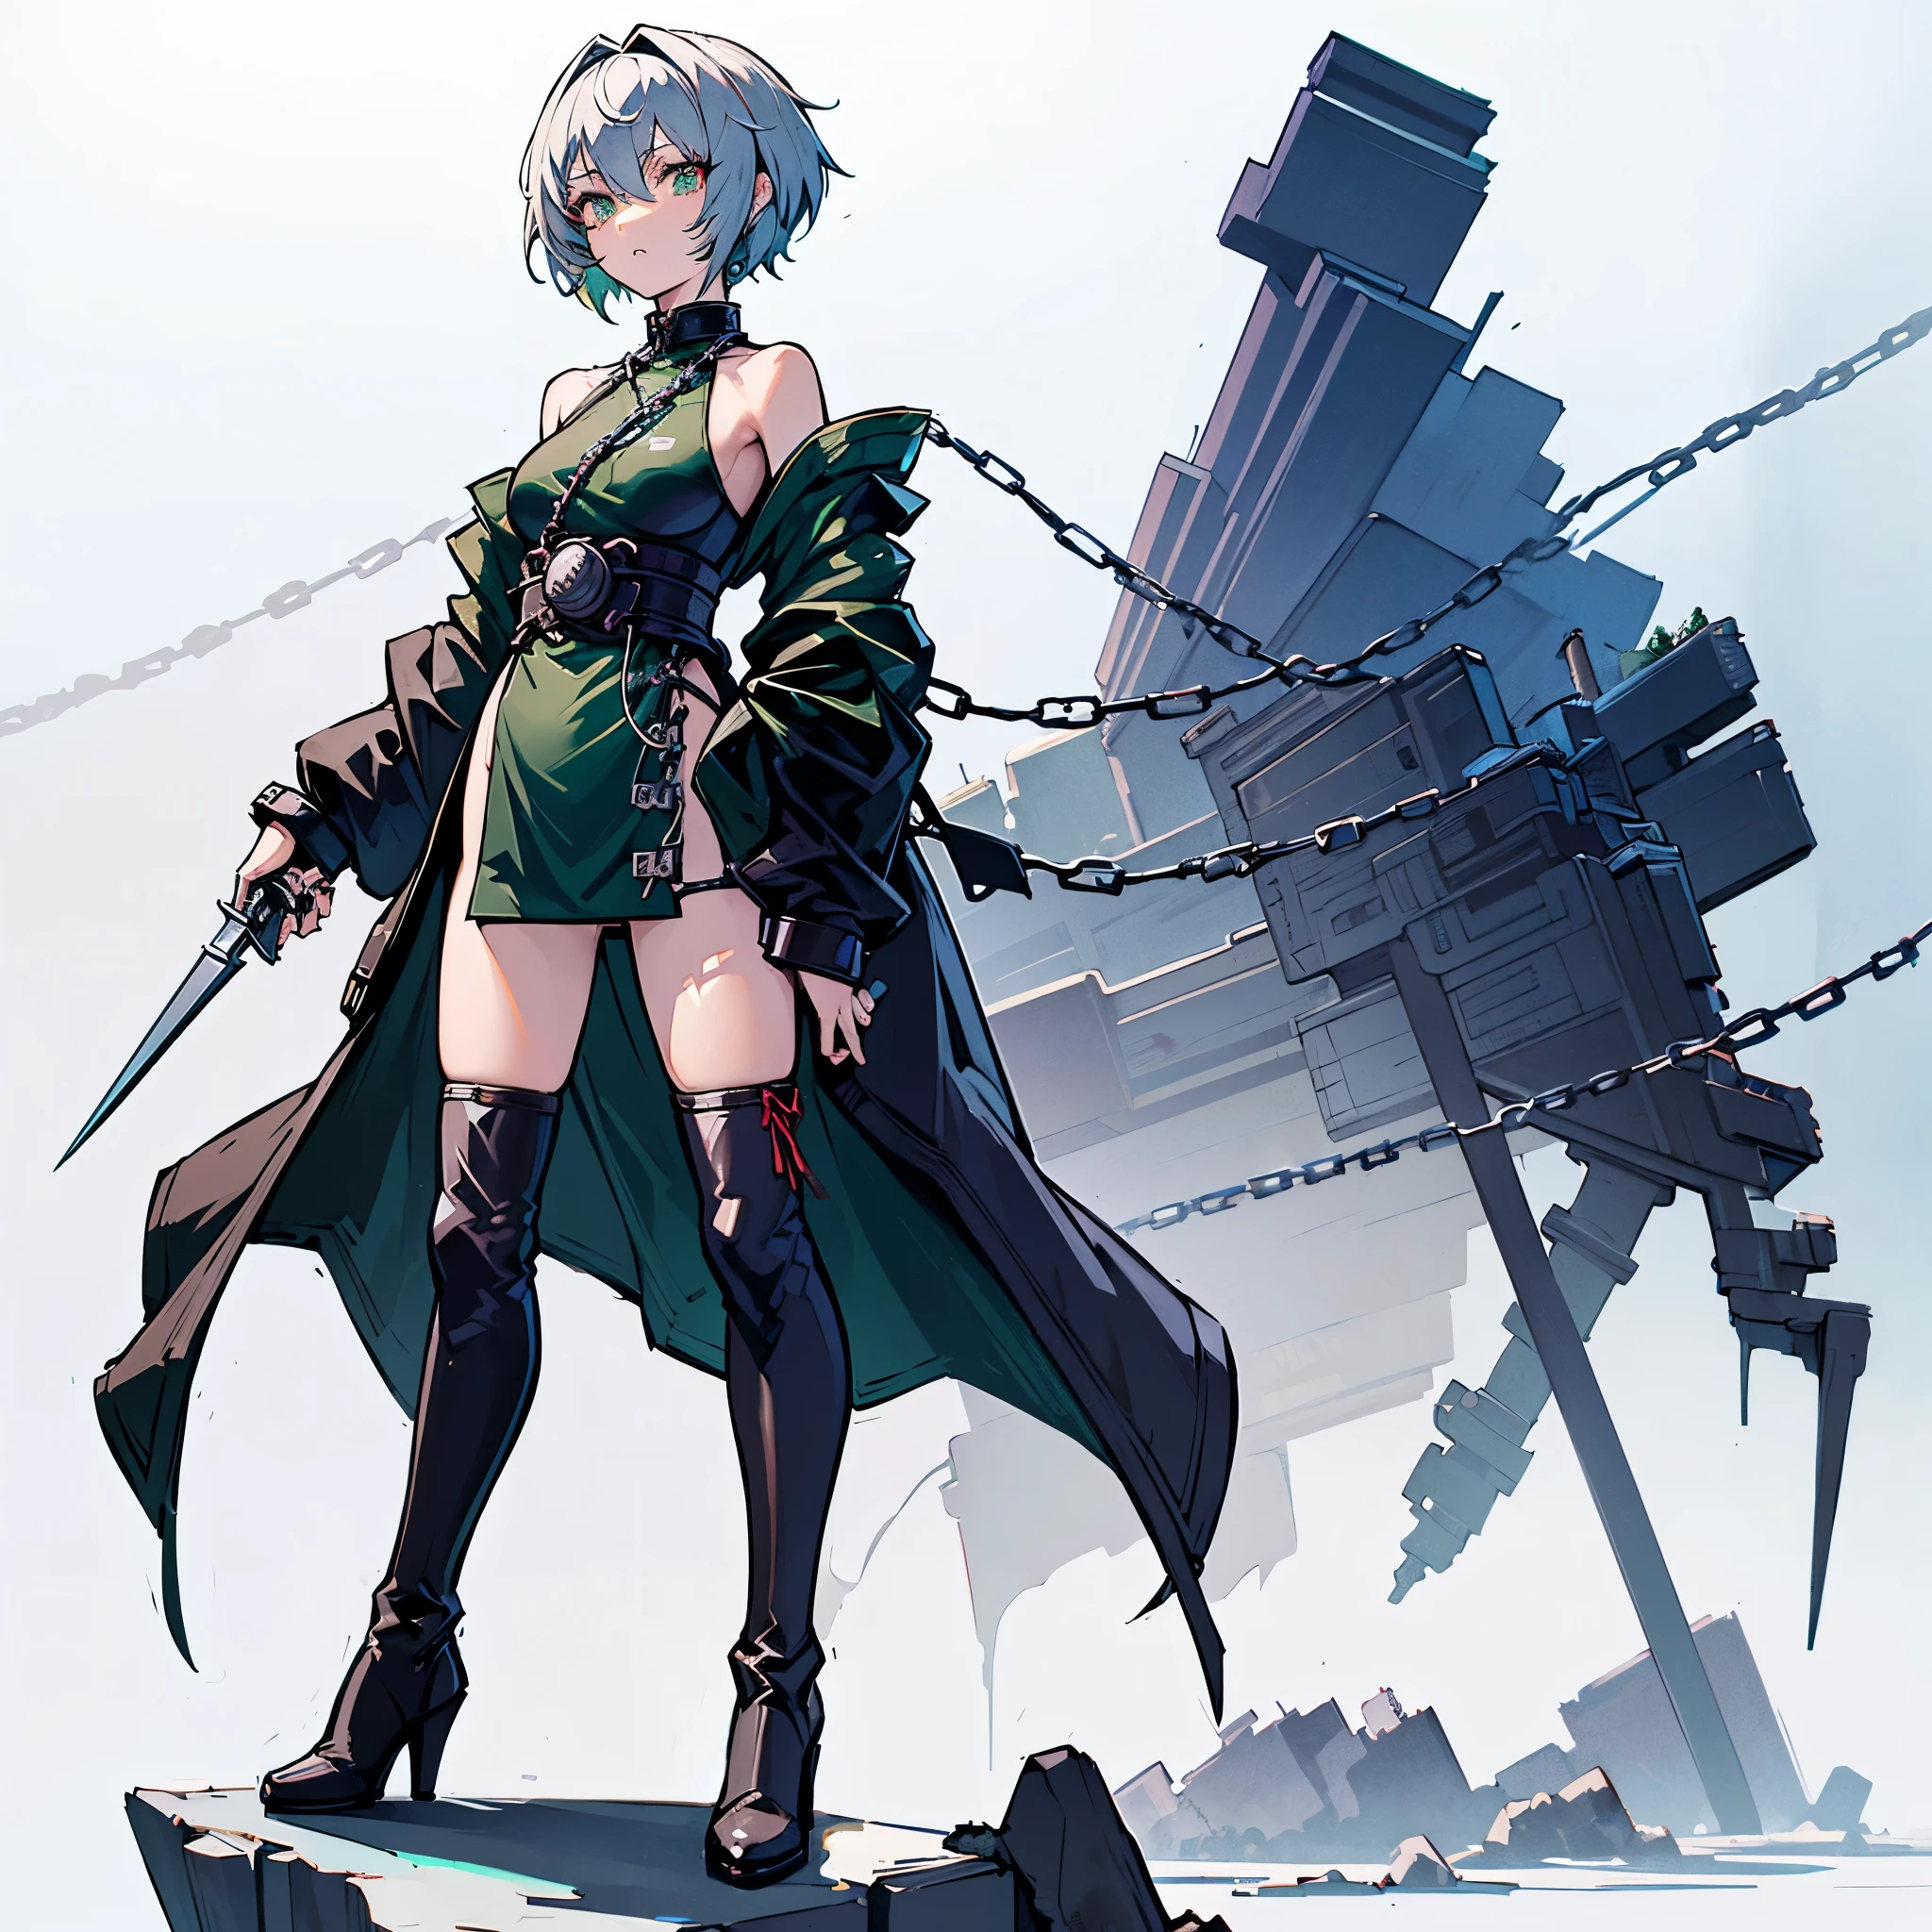 (Masterpiece, top quality), (detailed hair), super detailed, anime style, full body, solo, Cyberpunk ninja girl, medium short White hair, green eyes, wearing cyber kimono, feminine figure, holding chain kunai, chain wrapped rugged gauntlets, high heeled boots, standing wasteland, white background, whole body, chains around, chains everywhere 
